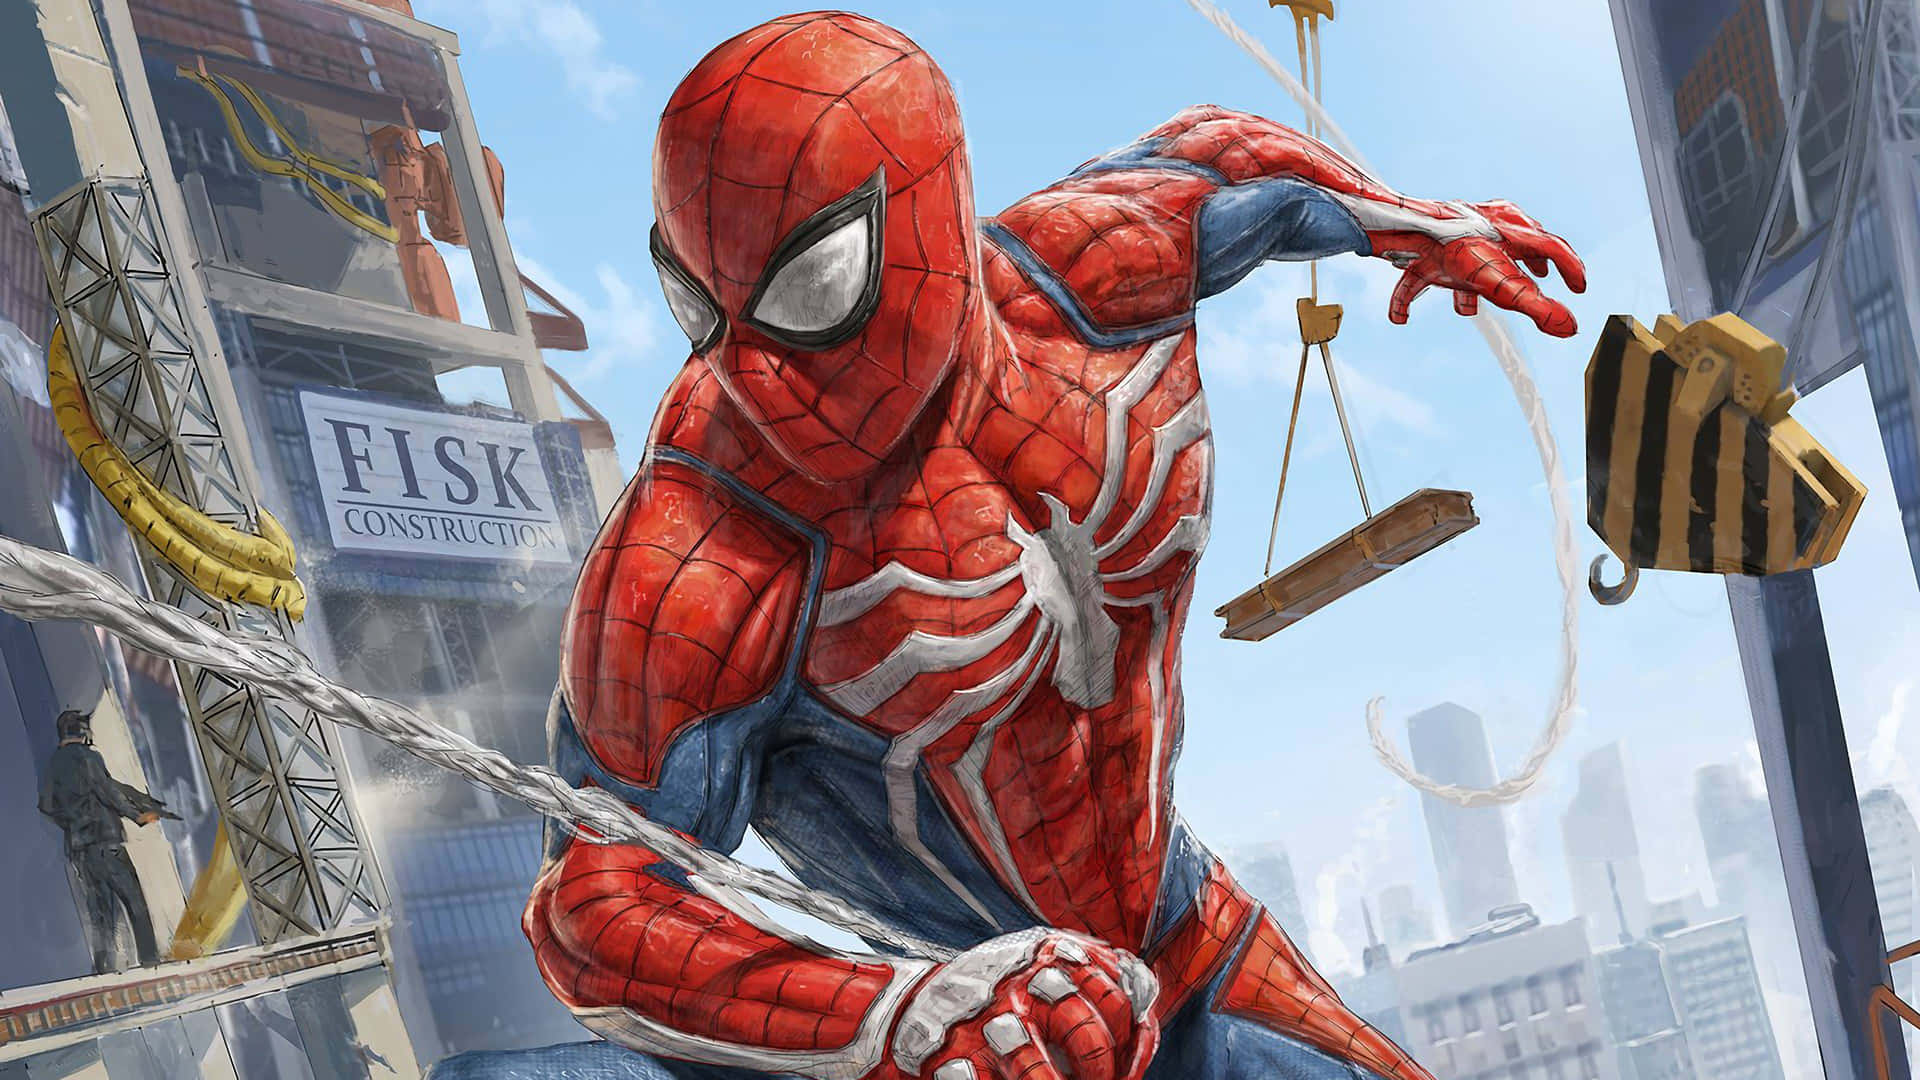 Free Spiderman Wallpaper Downloads, [600+] Spiderman Wallpapers for FREE |  